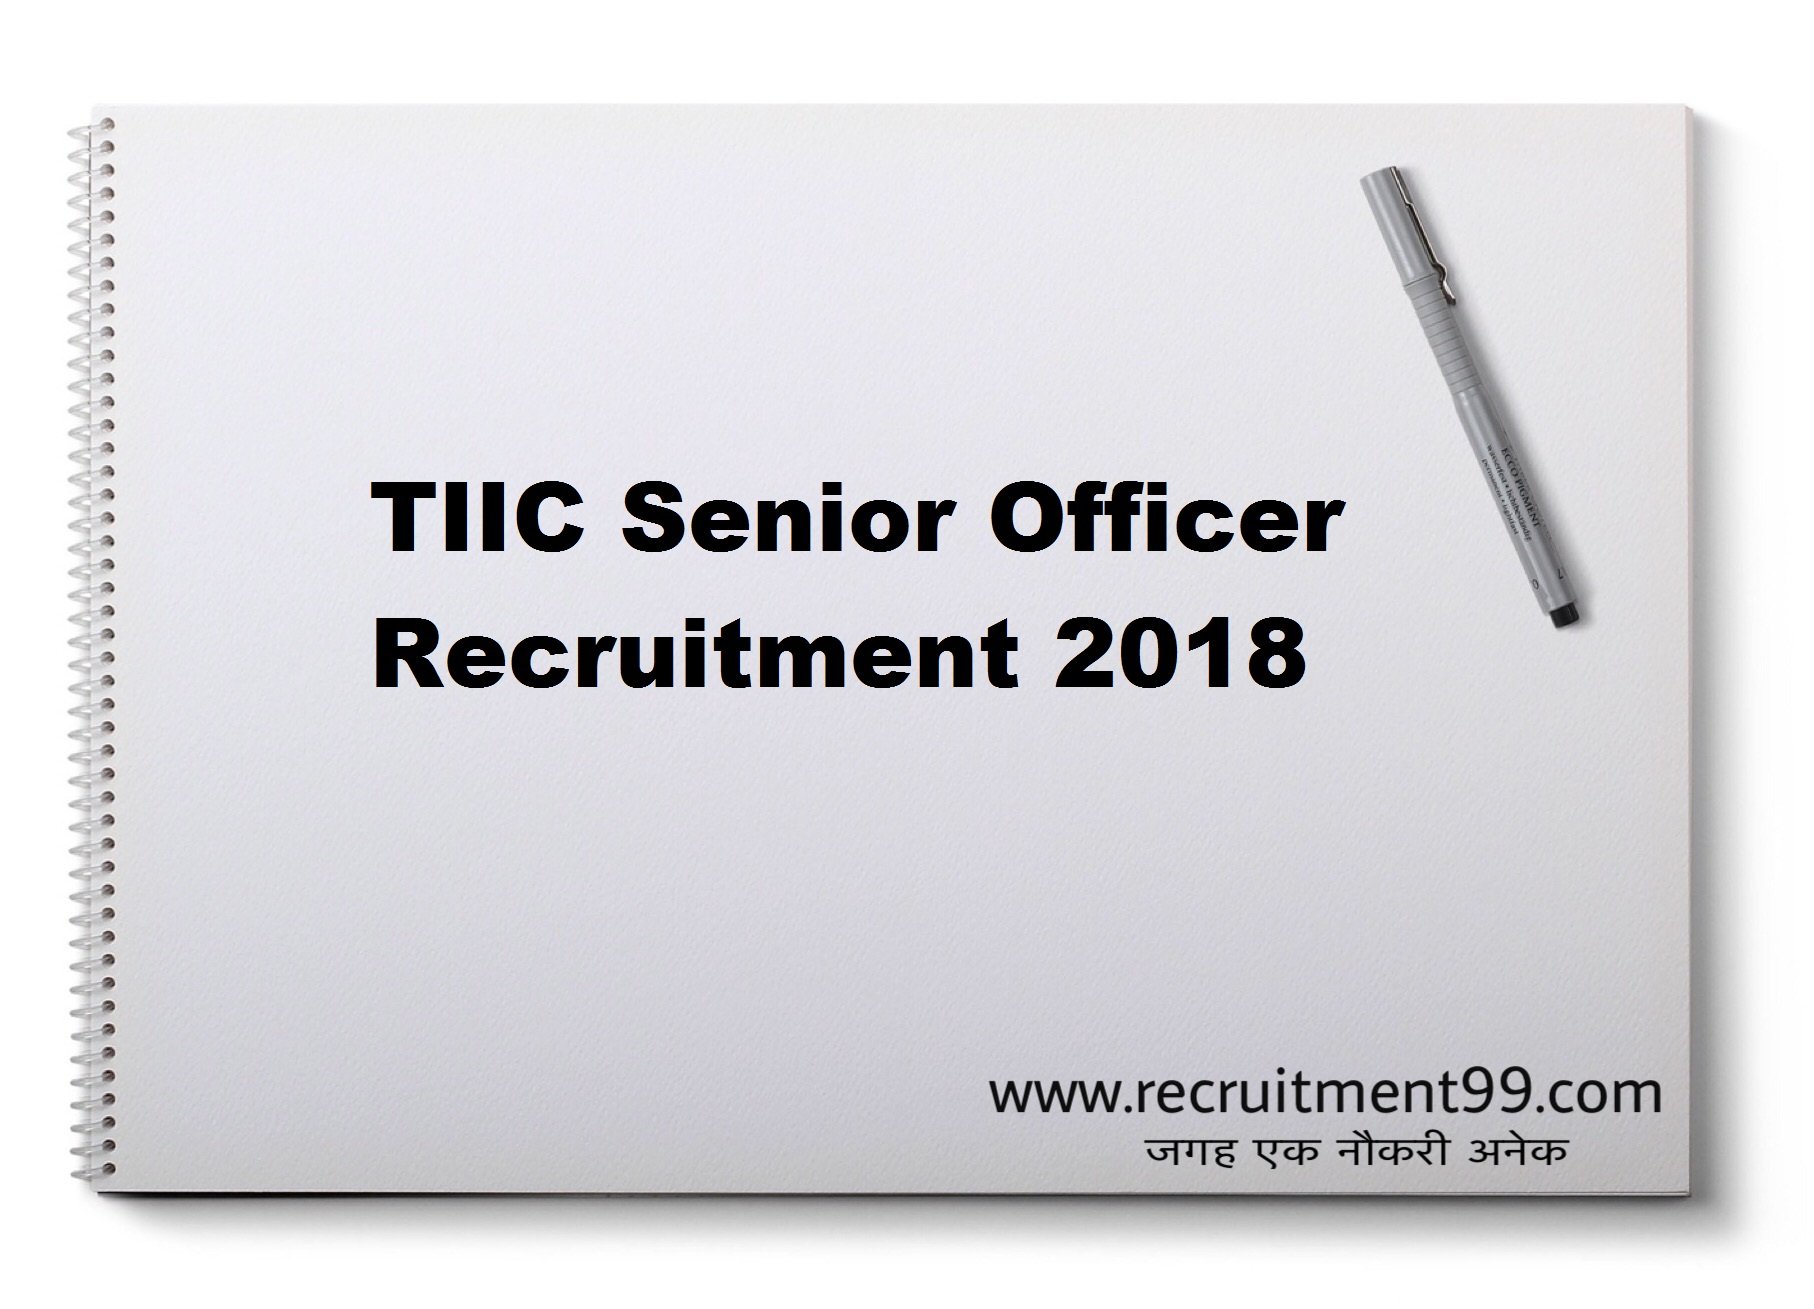  TIIC Senior Officer Recruitment Admit Card Result 2018